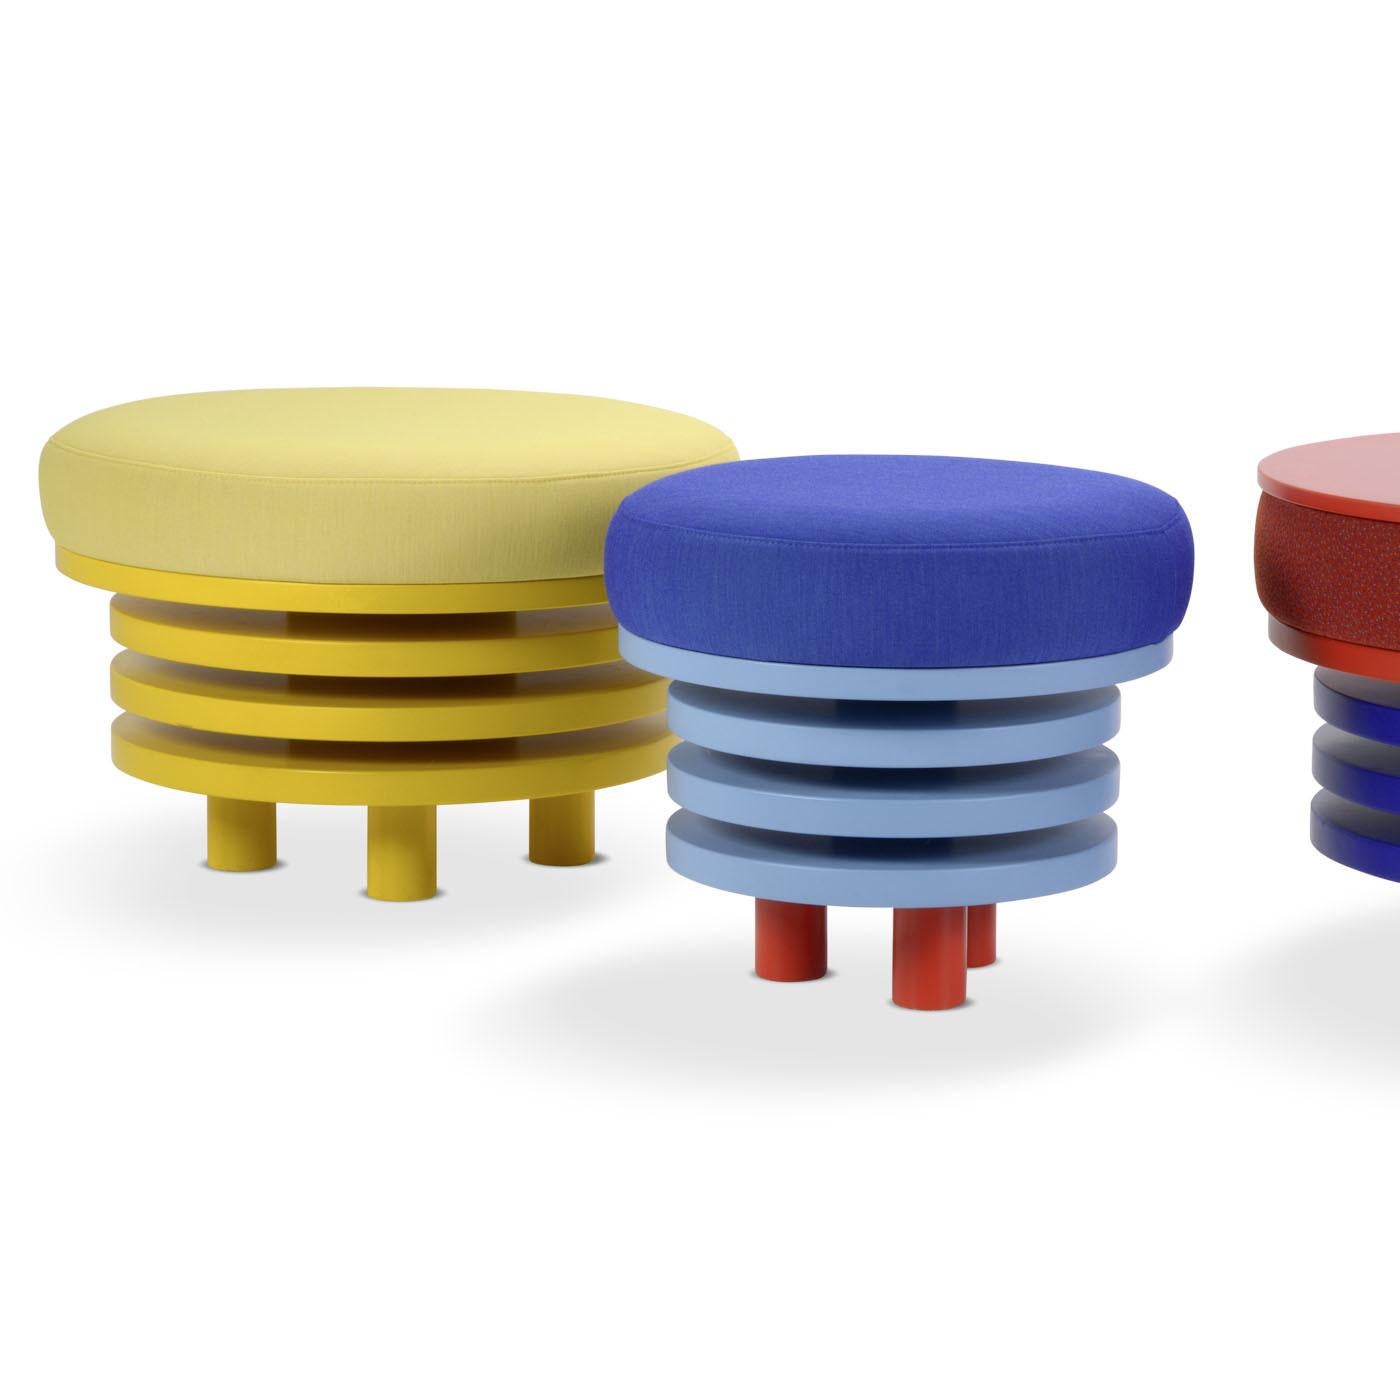 With a simple design, yet remarkable impact, the Roche Pouf has a base in painted beech wood to suit any environment. Offering relaxation, it is all the more comfortable with the harmonious colors available: white, yellow, orange, red, purple, pink,